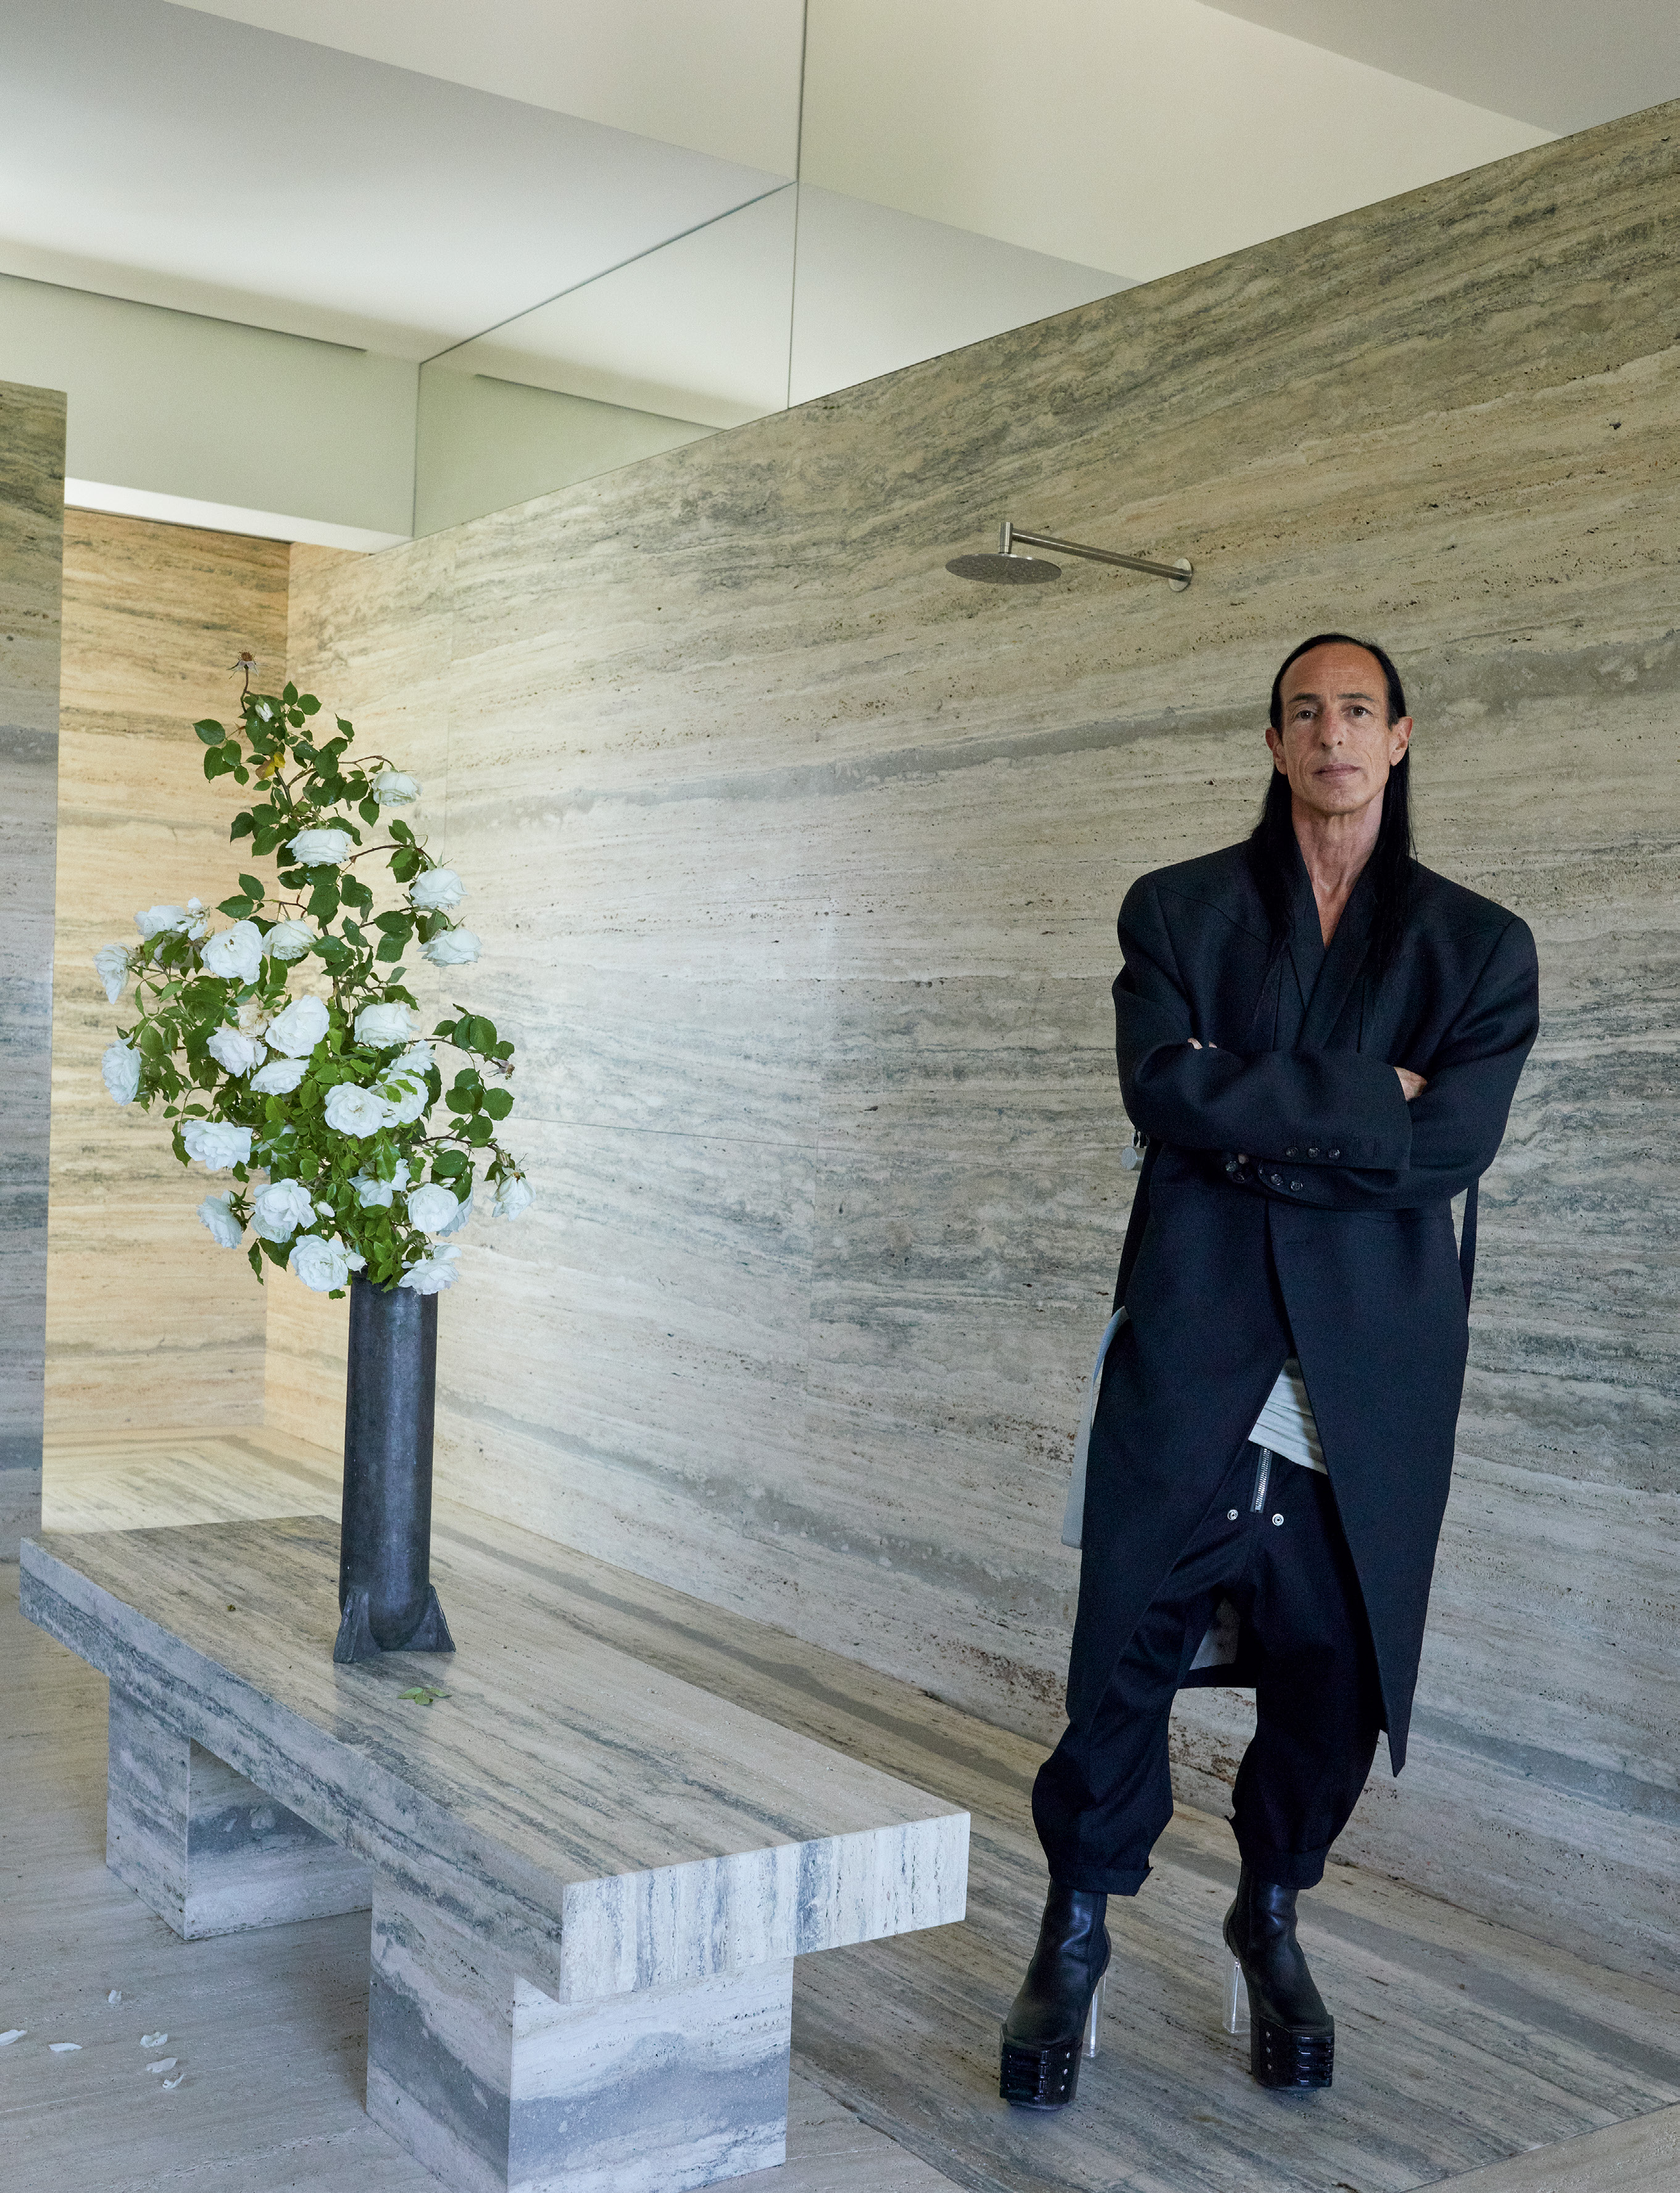 Style Isn't Everything: A Conversation With Rick Owens